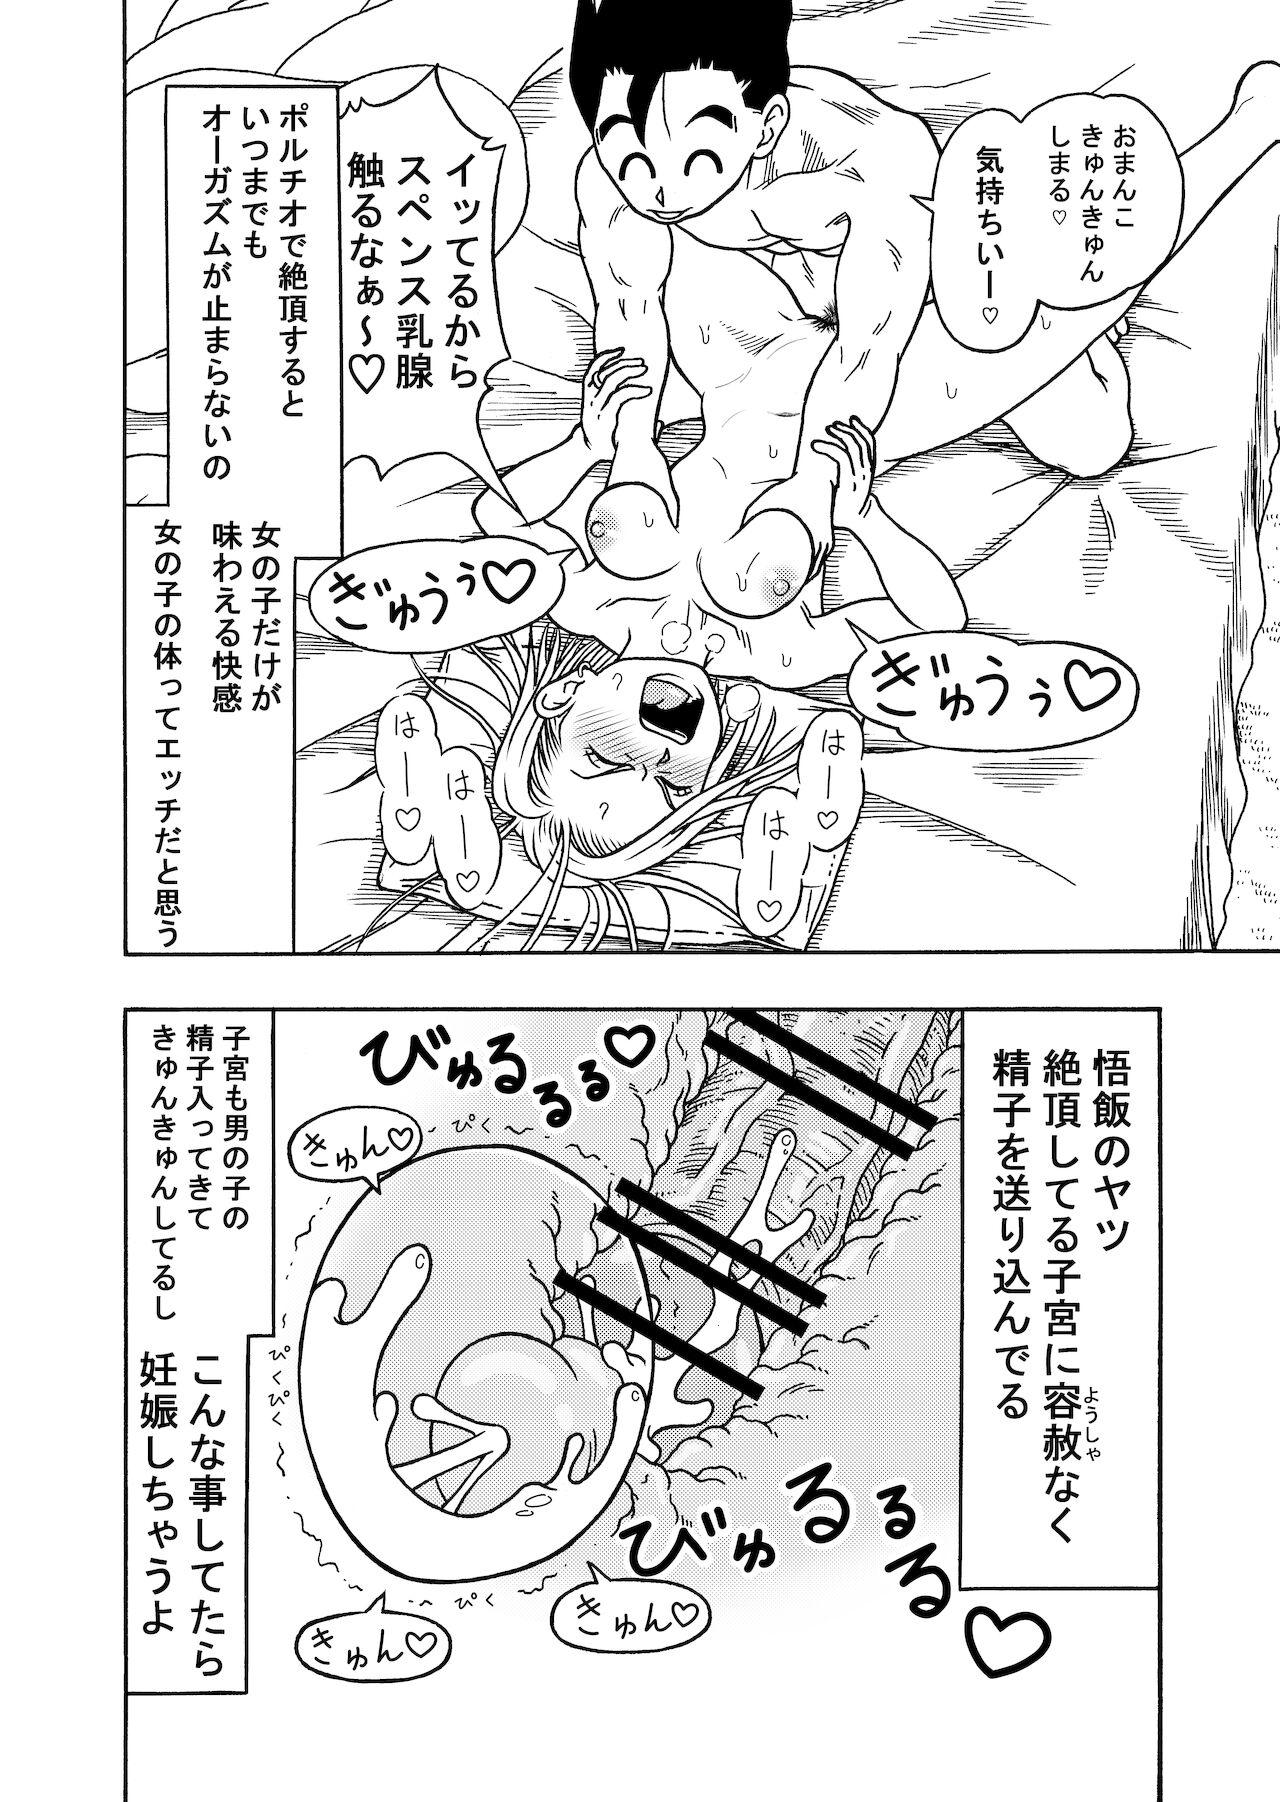 Two 18's NTR pies on parade 3 - Dragon ball z Trimmed - Page 12